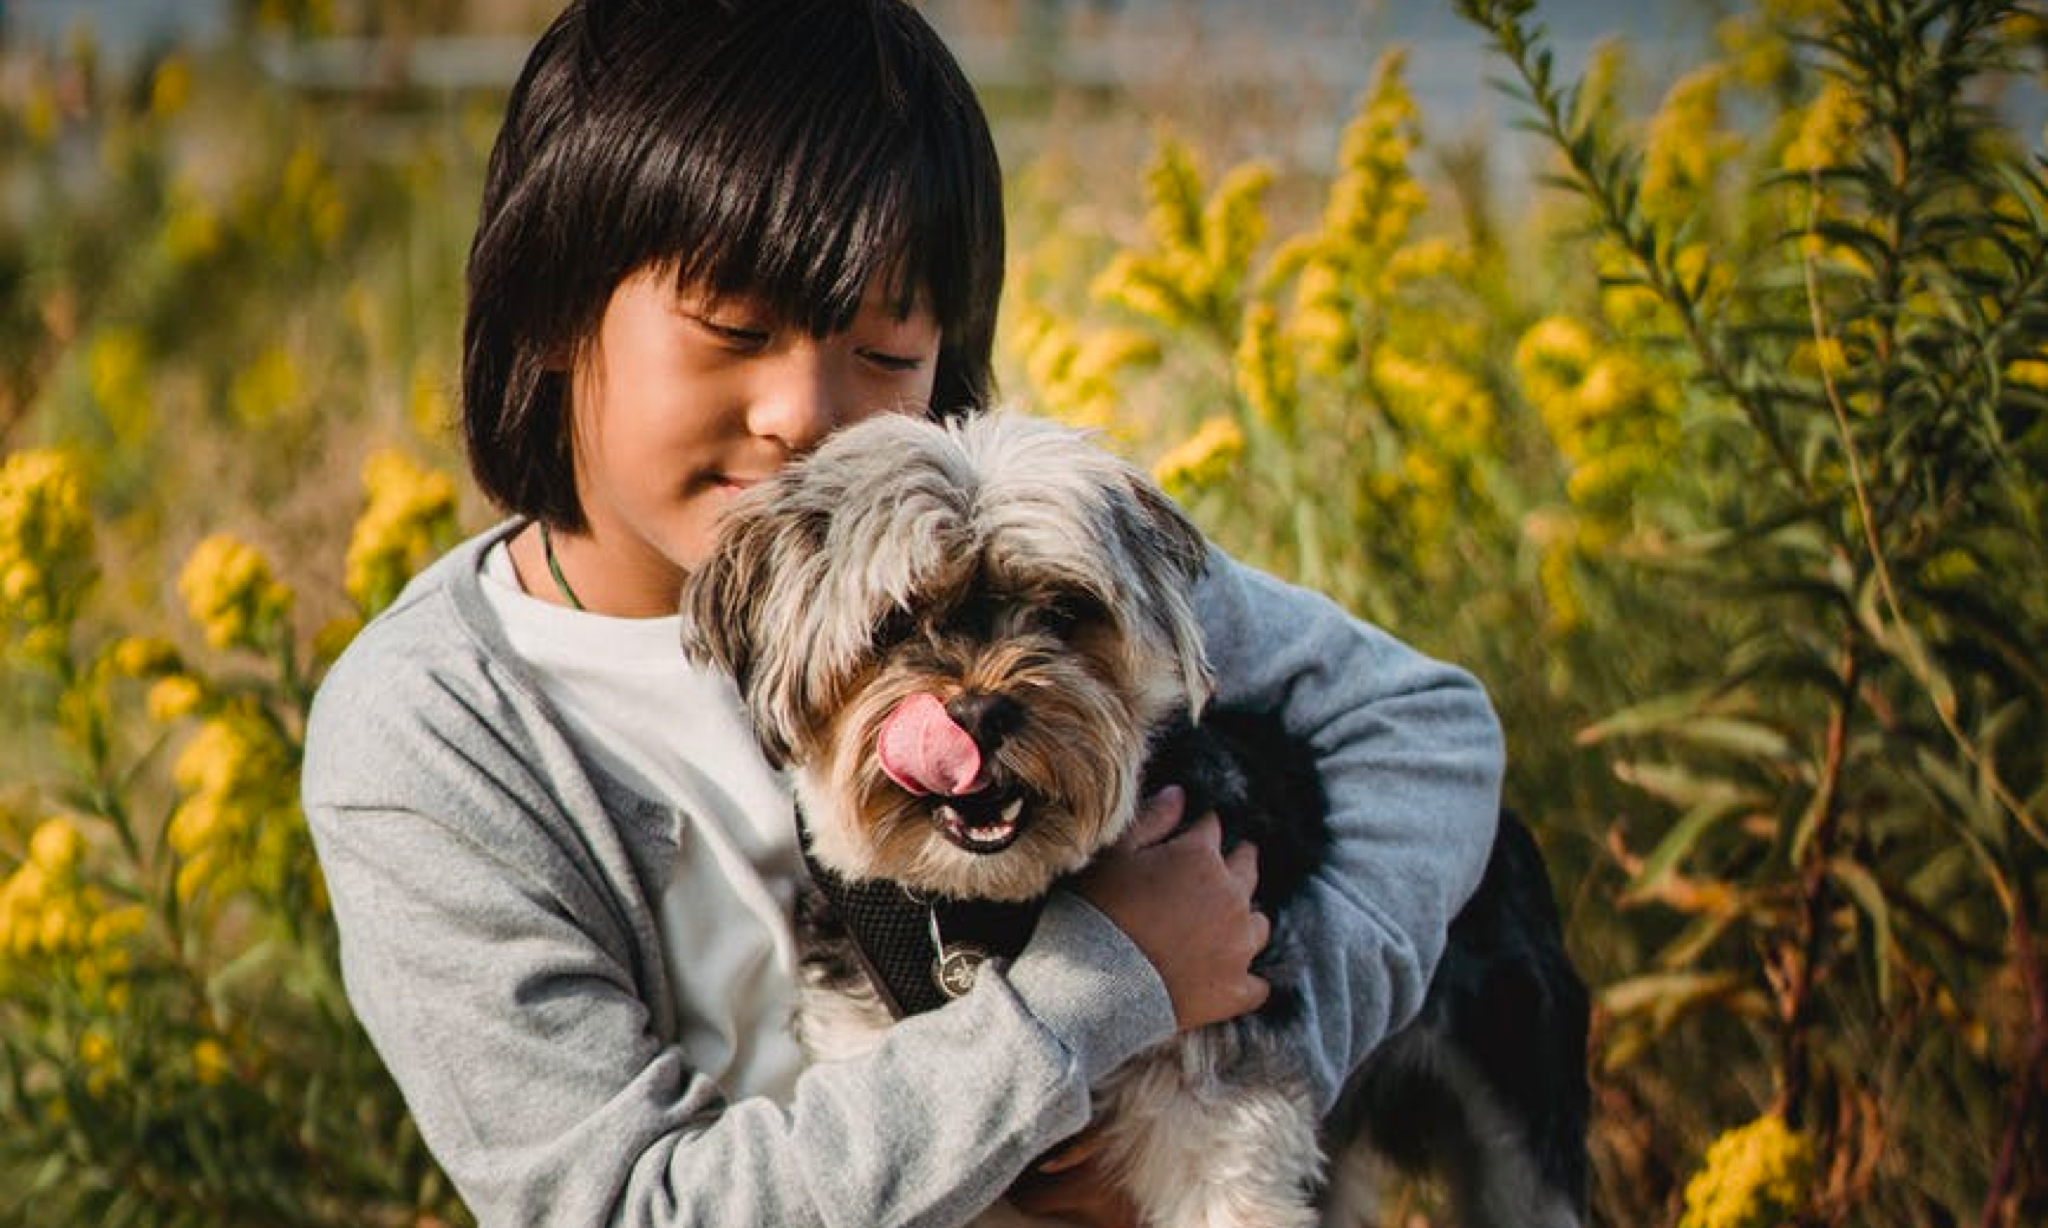 5 Things to Consider Before Getting Your Child a Dog